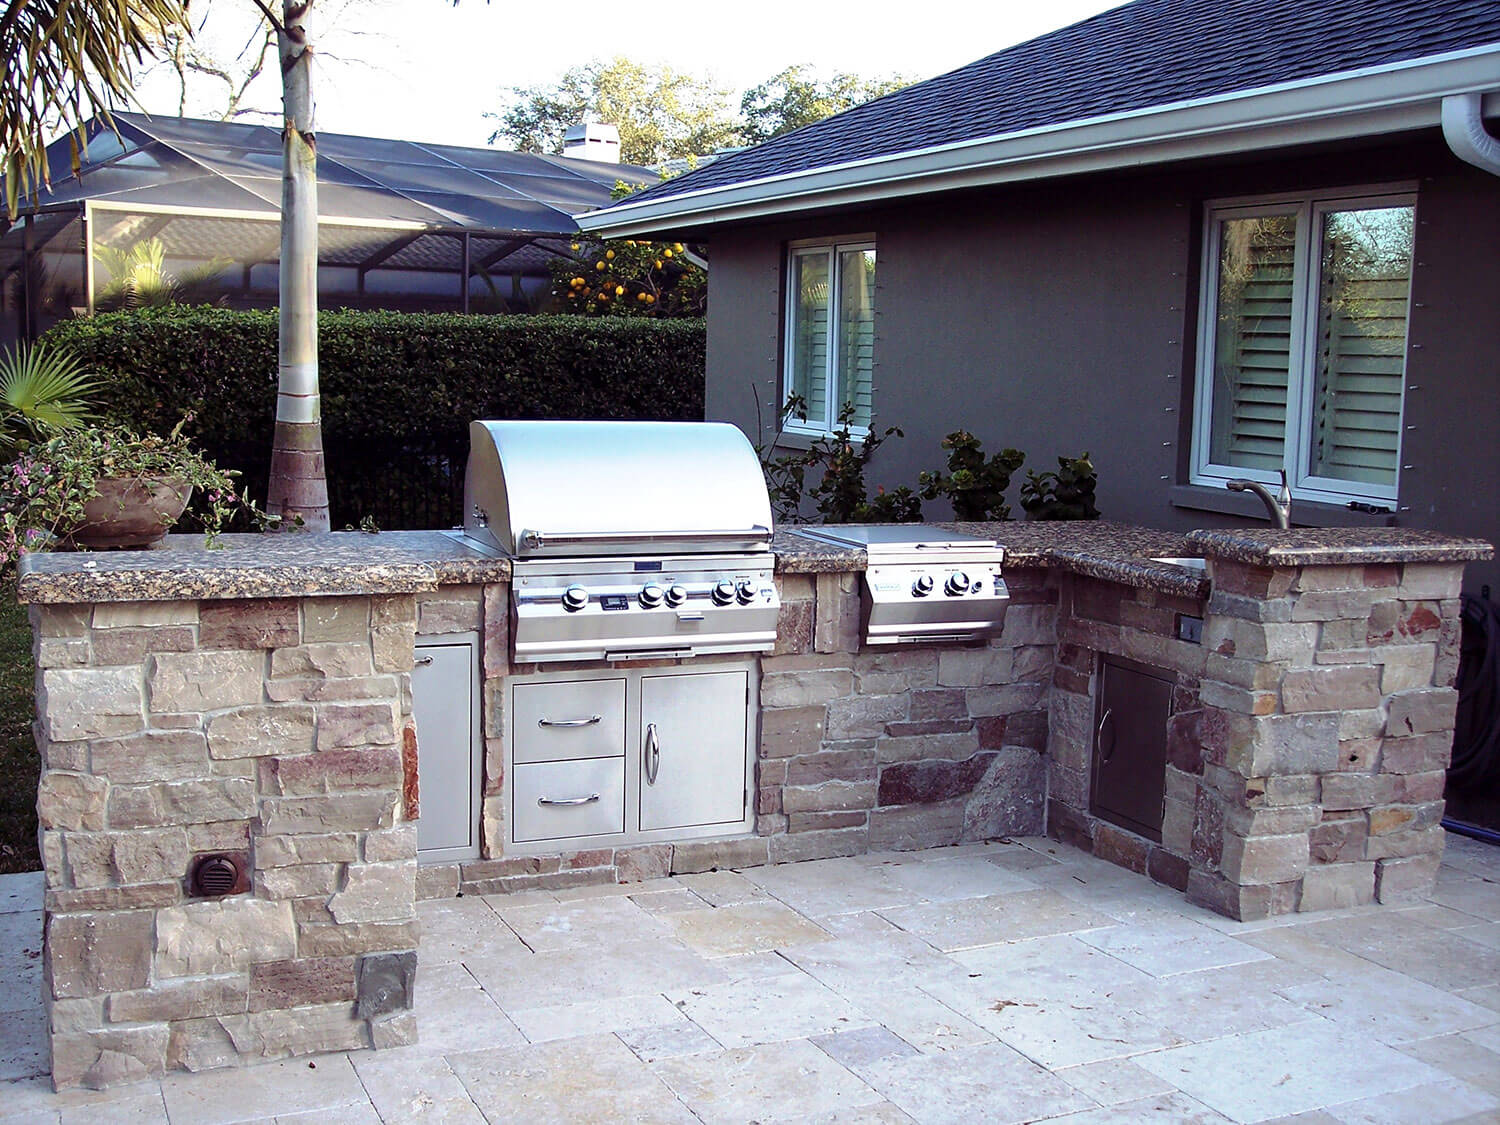 Fire Magic Kitchen In Odessa - Just Grillin Outdoor Living